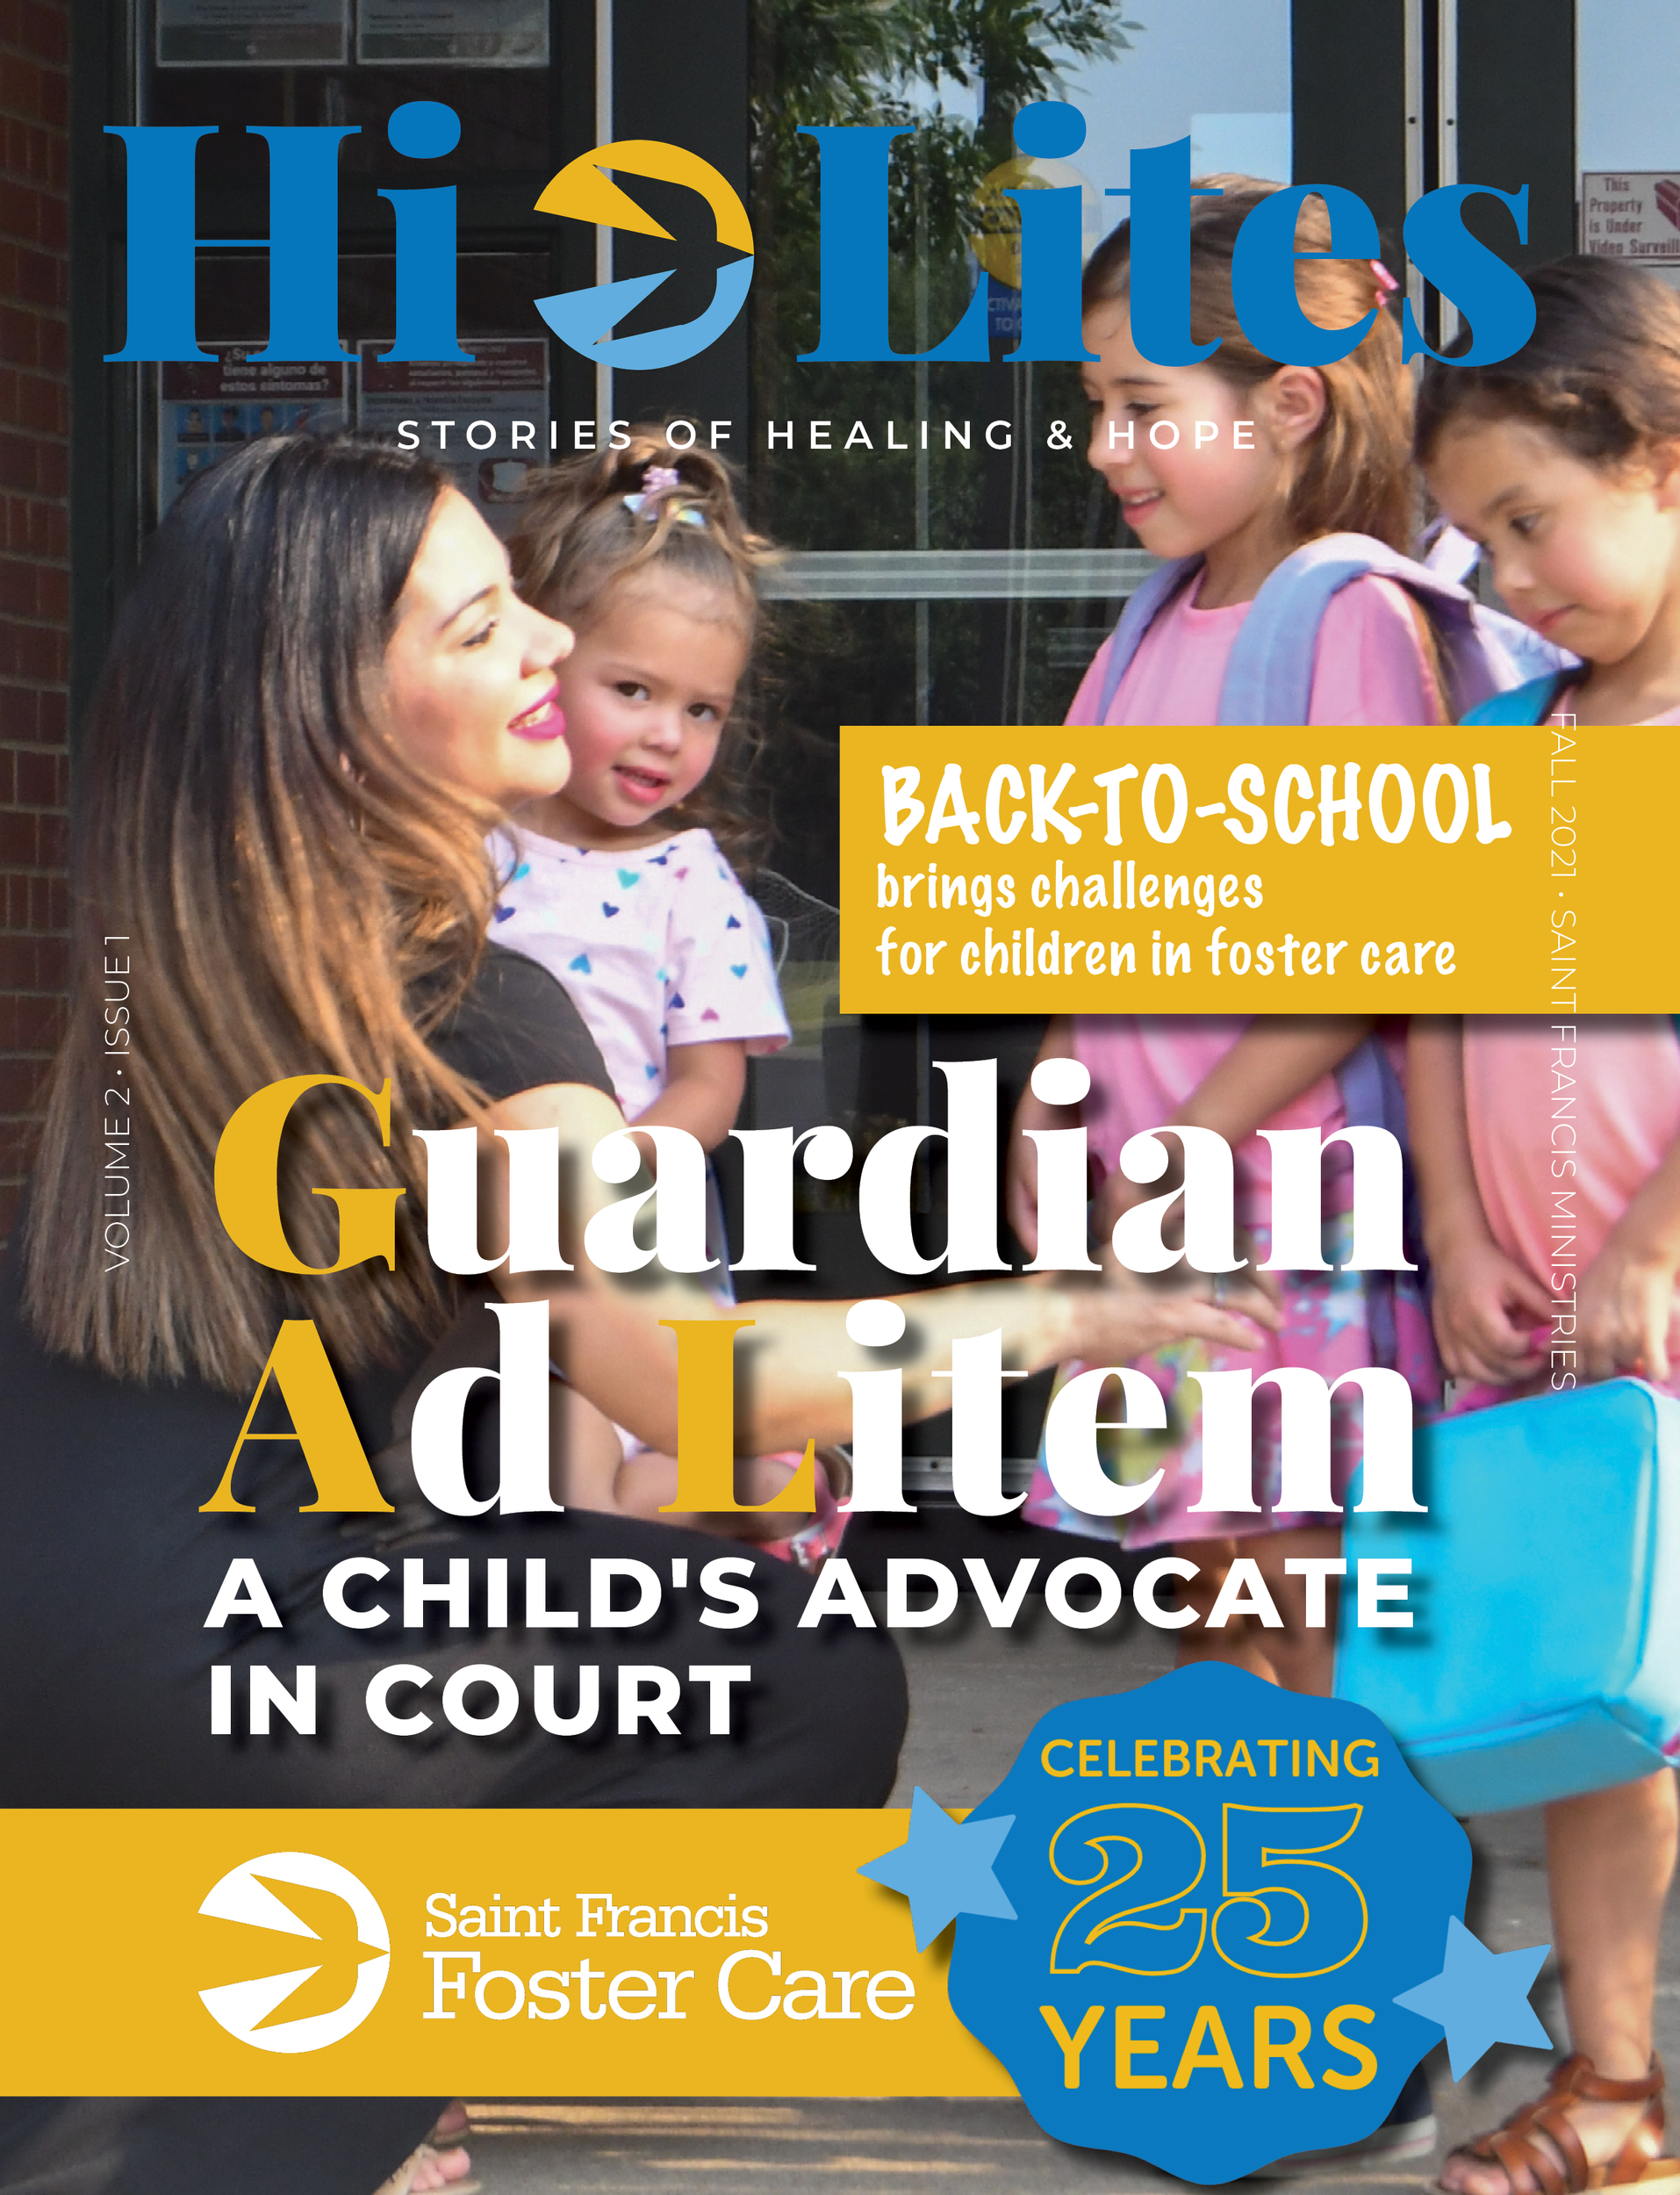 A woman, kneeling, talks with two children while another child stands nearby holding a blue backpack. The cover text includes "Hi Lites," "Guardian Ad Litem: A Child's Advocate in Court," and mentions back-to-school challenges for foster children and a 25th anniversary.